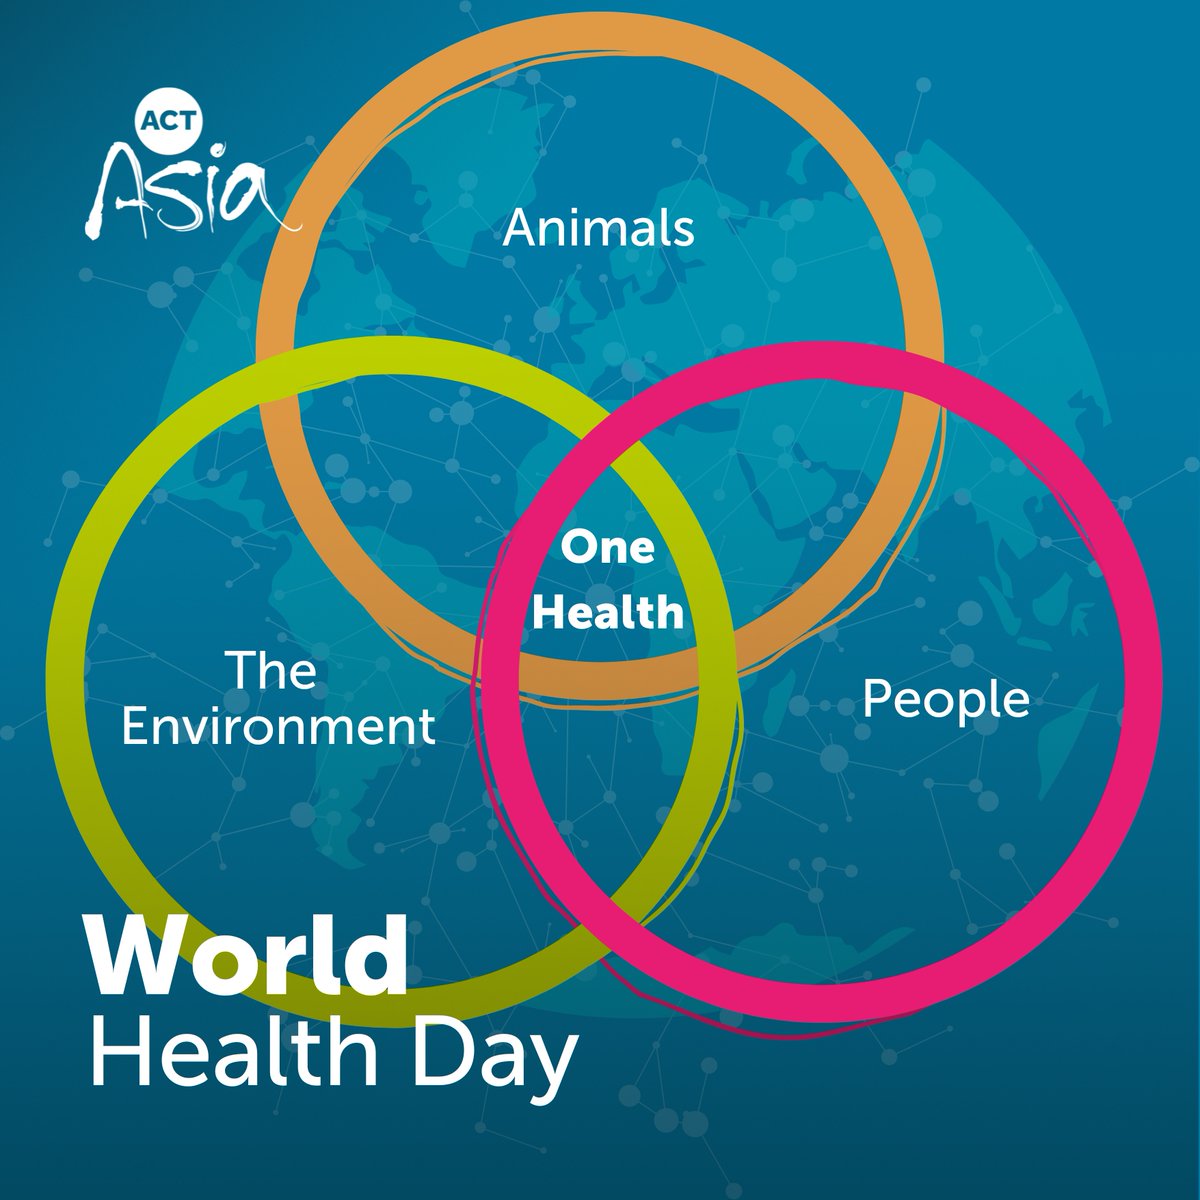 On UN World Health Day, we're thinking about One Health: The vital interdependance between animals, people and the environment 🐾👣🌿 It affects the entire planet 🌏 We're all in this together actasia.org/our-work/ #Earth #OneHealth #Together